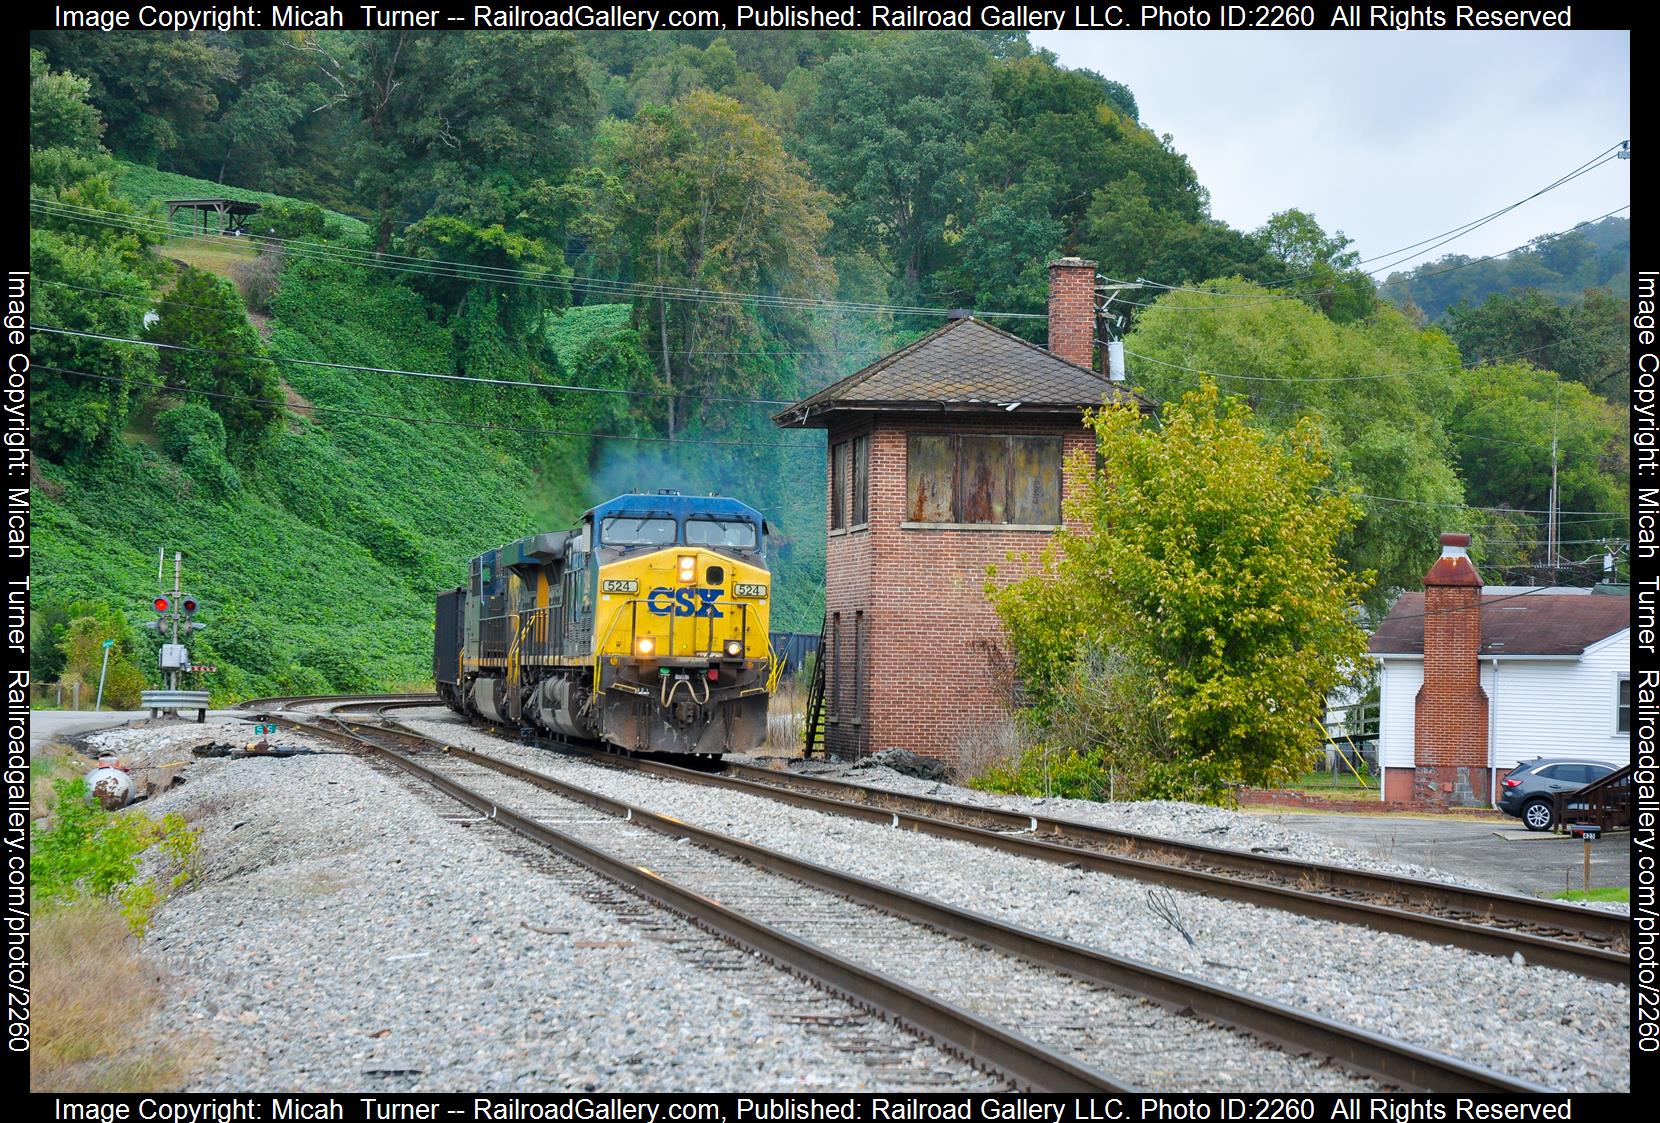 E090-02, CSX 524 is a class AC44CW and  is pictured in Baxter, Kentucky, USA.  This was taken along the Cumberland Valley Subdivision on the CSX Transportation. Photo Copyright: Micah  Turner uploaded to Railroad Gallery on 08/10/2023. This photograph of E090-02, CSX 524 was taken on Sunday, October 02, 2022. All Rights Reserved. 